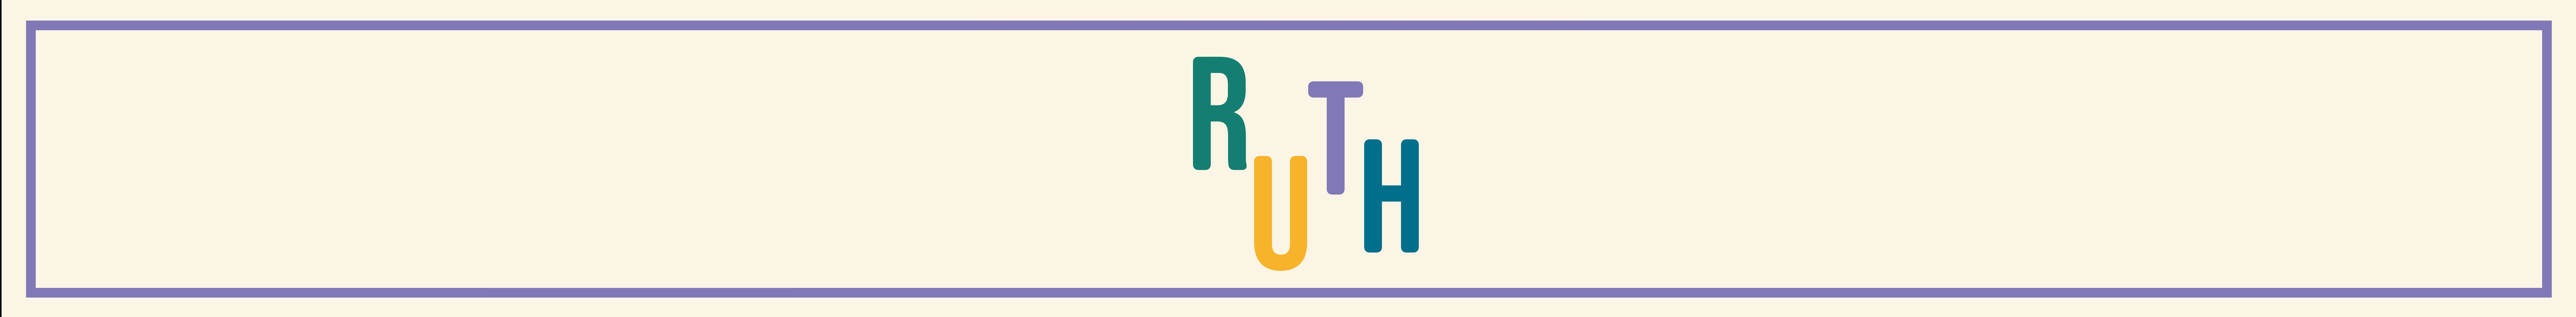 Ruth Evans's profile banner